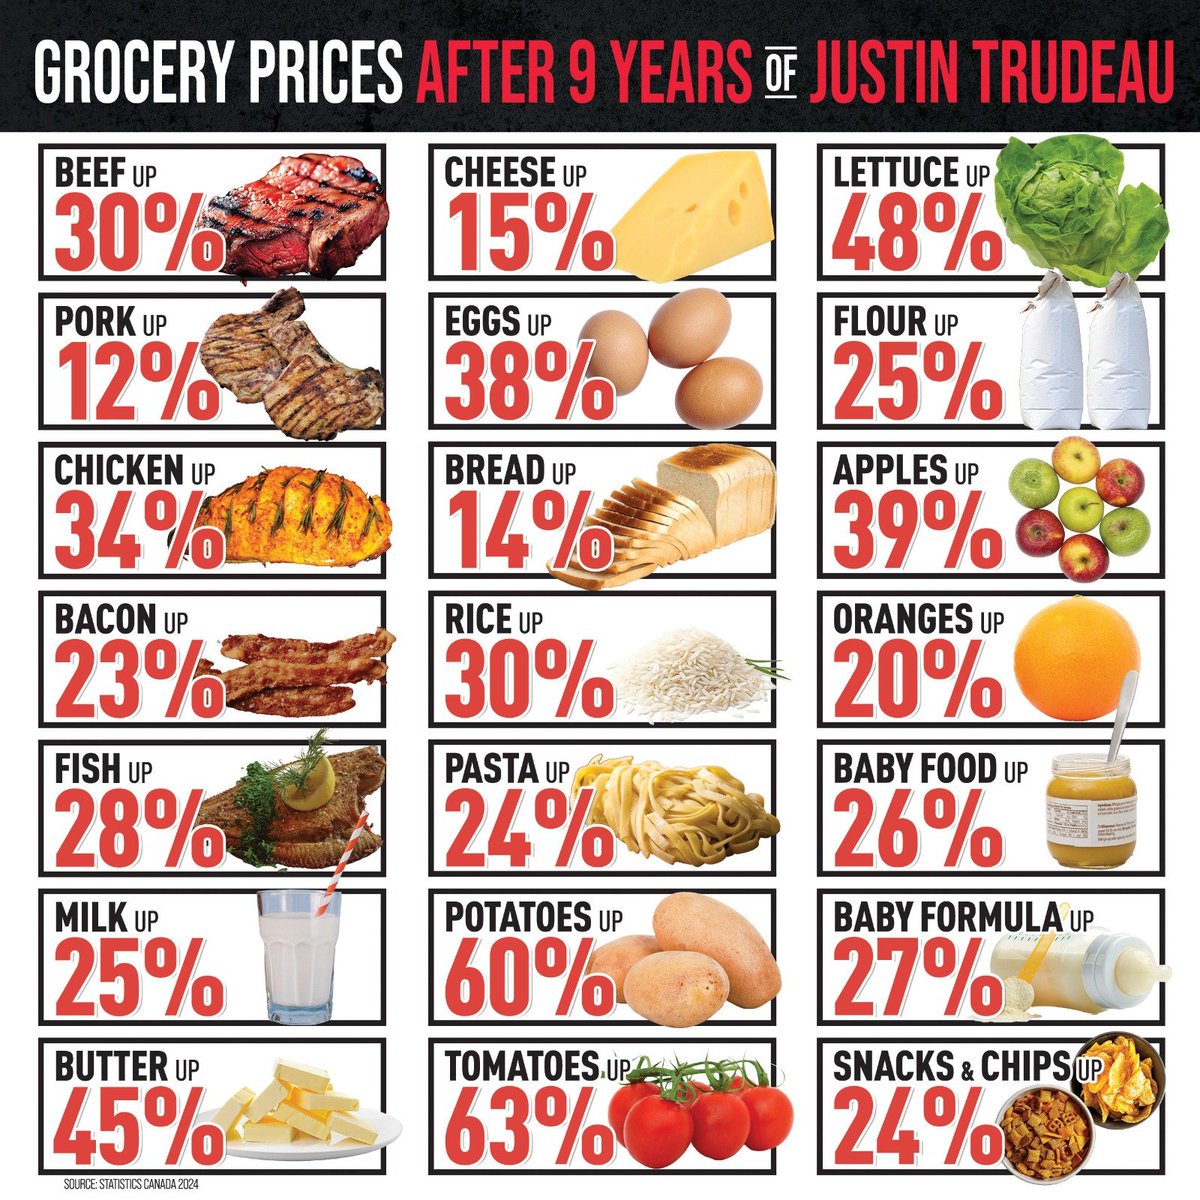 Nine years of Trudeau's inflationary spending has left Canadians struggling to put nutritious meals on the table. Canadians are being punished by this government's spending every time they go shopping. It is time to elect a Conservative government to restore affordability .